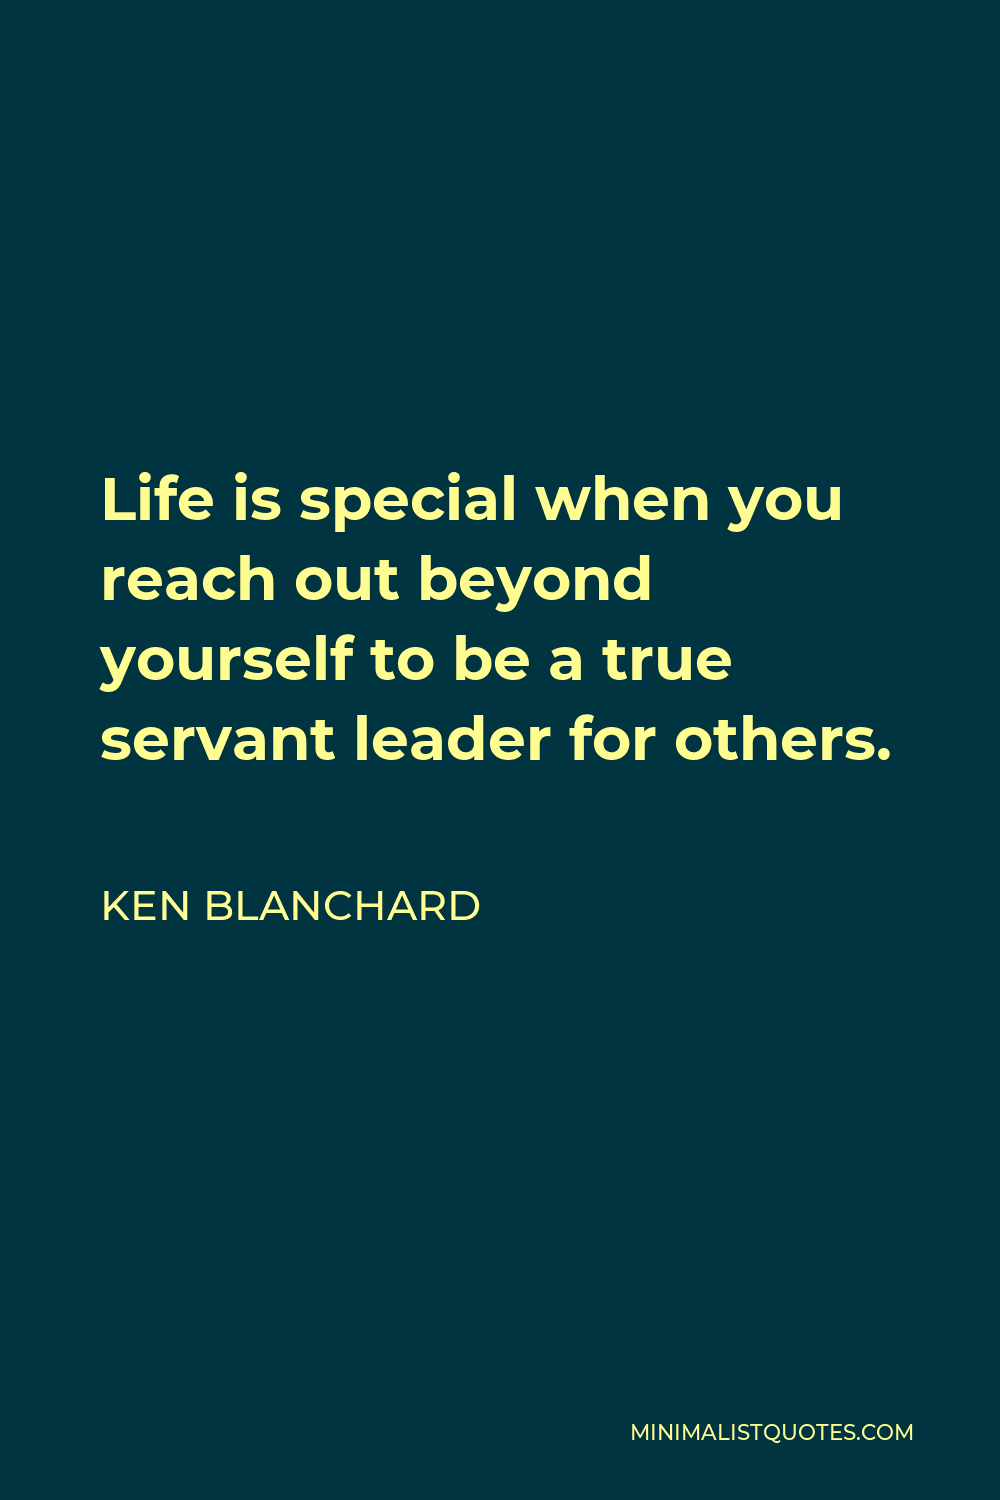 Ken Blanchard Quote - Life is special when you reach out beyond yourself to be a true servant leader for others.